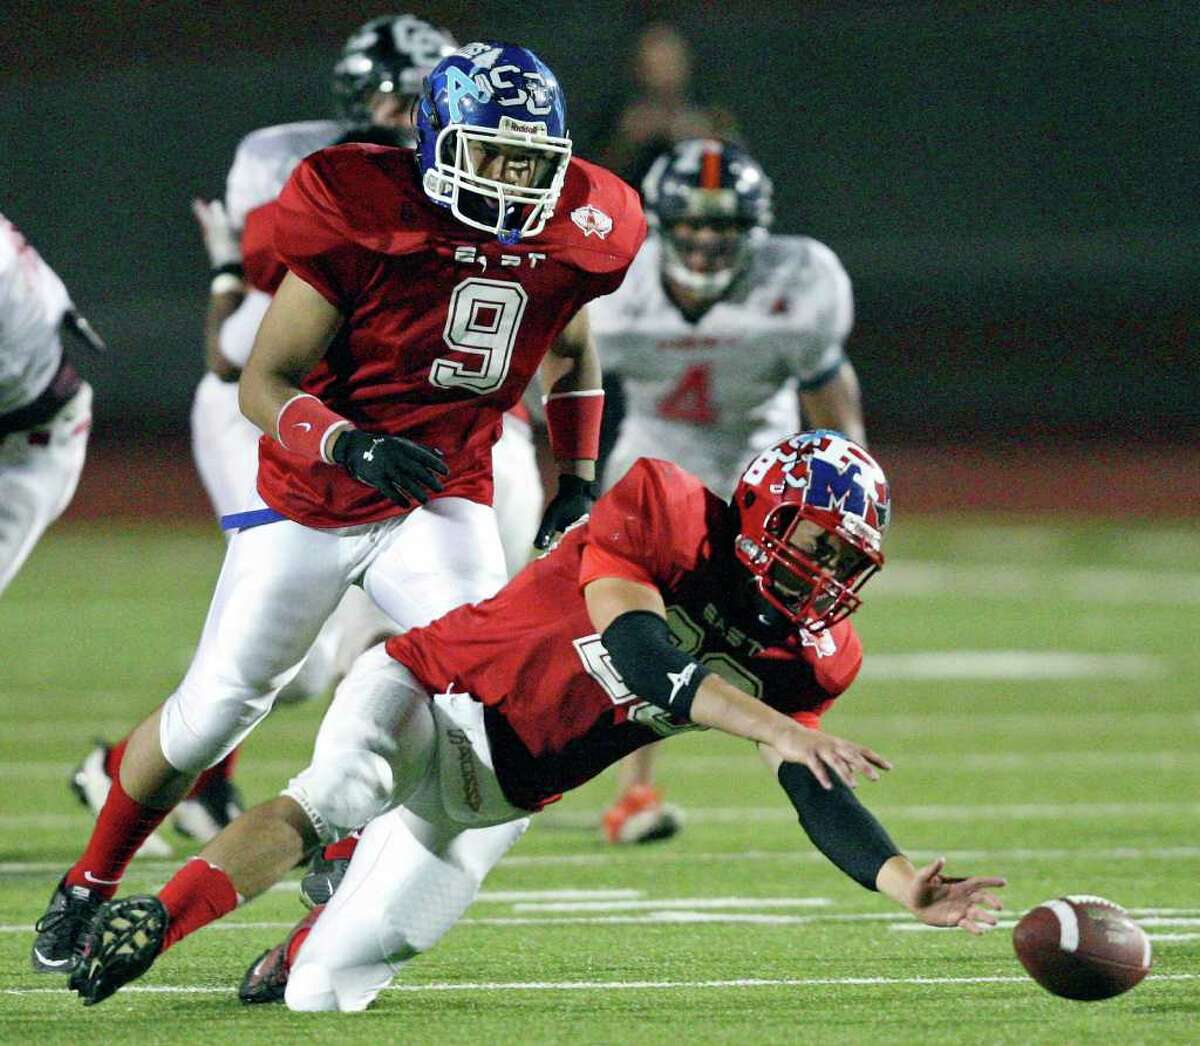 East team's Drake Cannon grabs for a fumble as teammate East team's Vincent Yates Jr. move in during second half action against the West team in the 33rd annual Pizza Hut High School All-Star Football Game held Saturday May 21, 2011 at Heroes Stadium. The East team won 15-7.